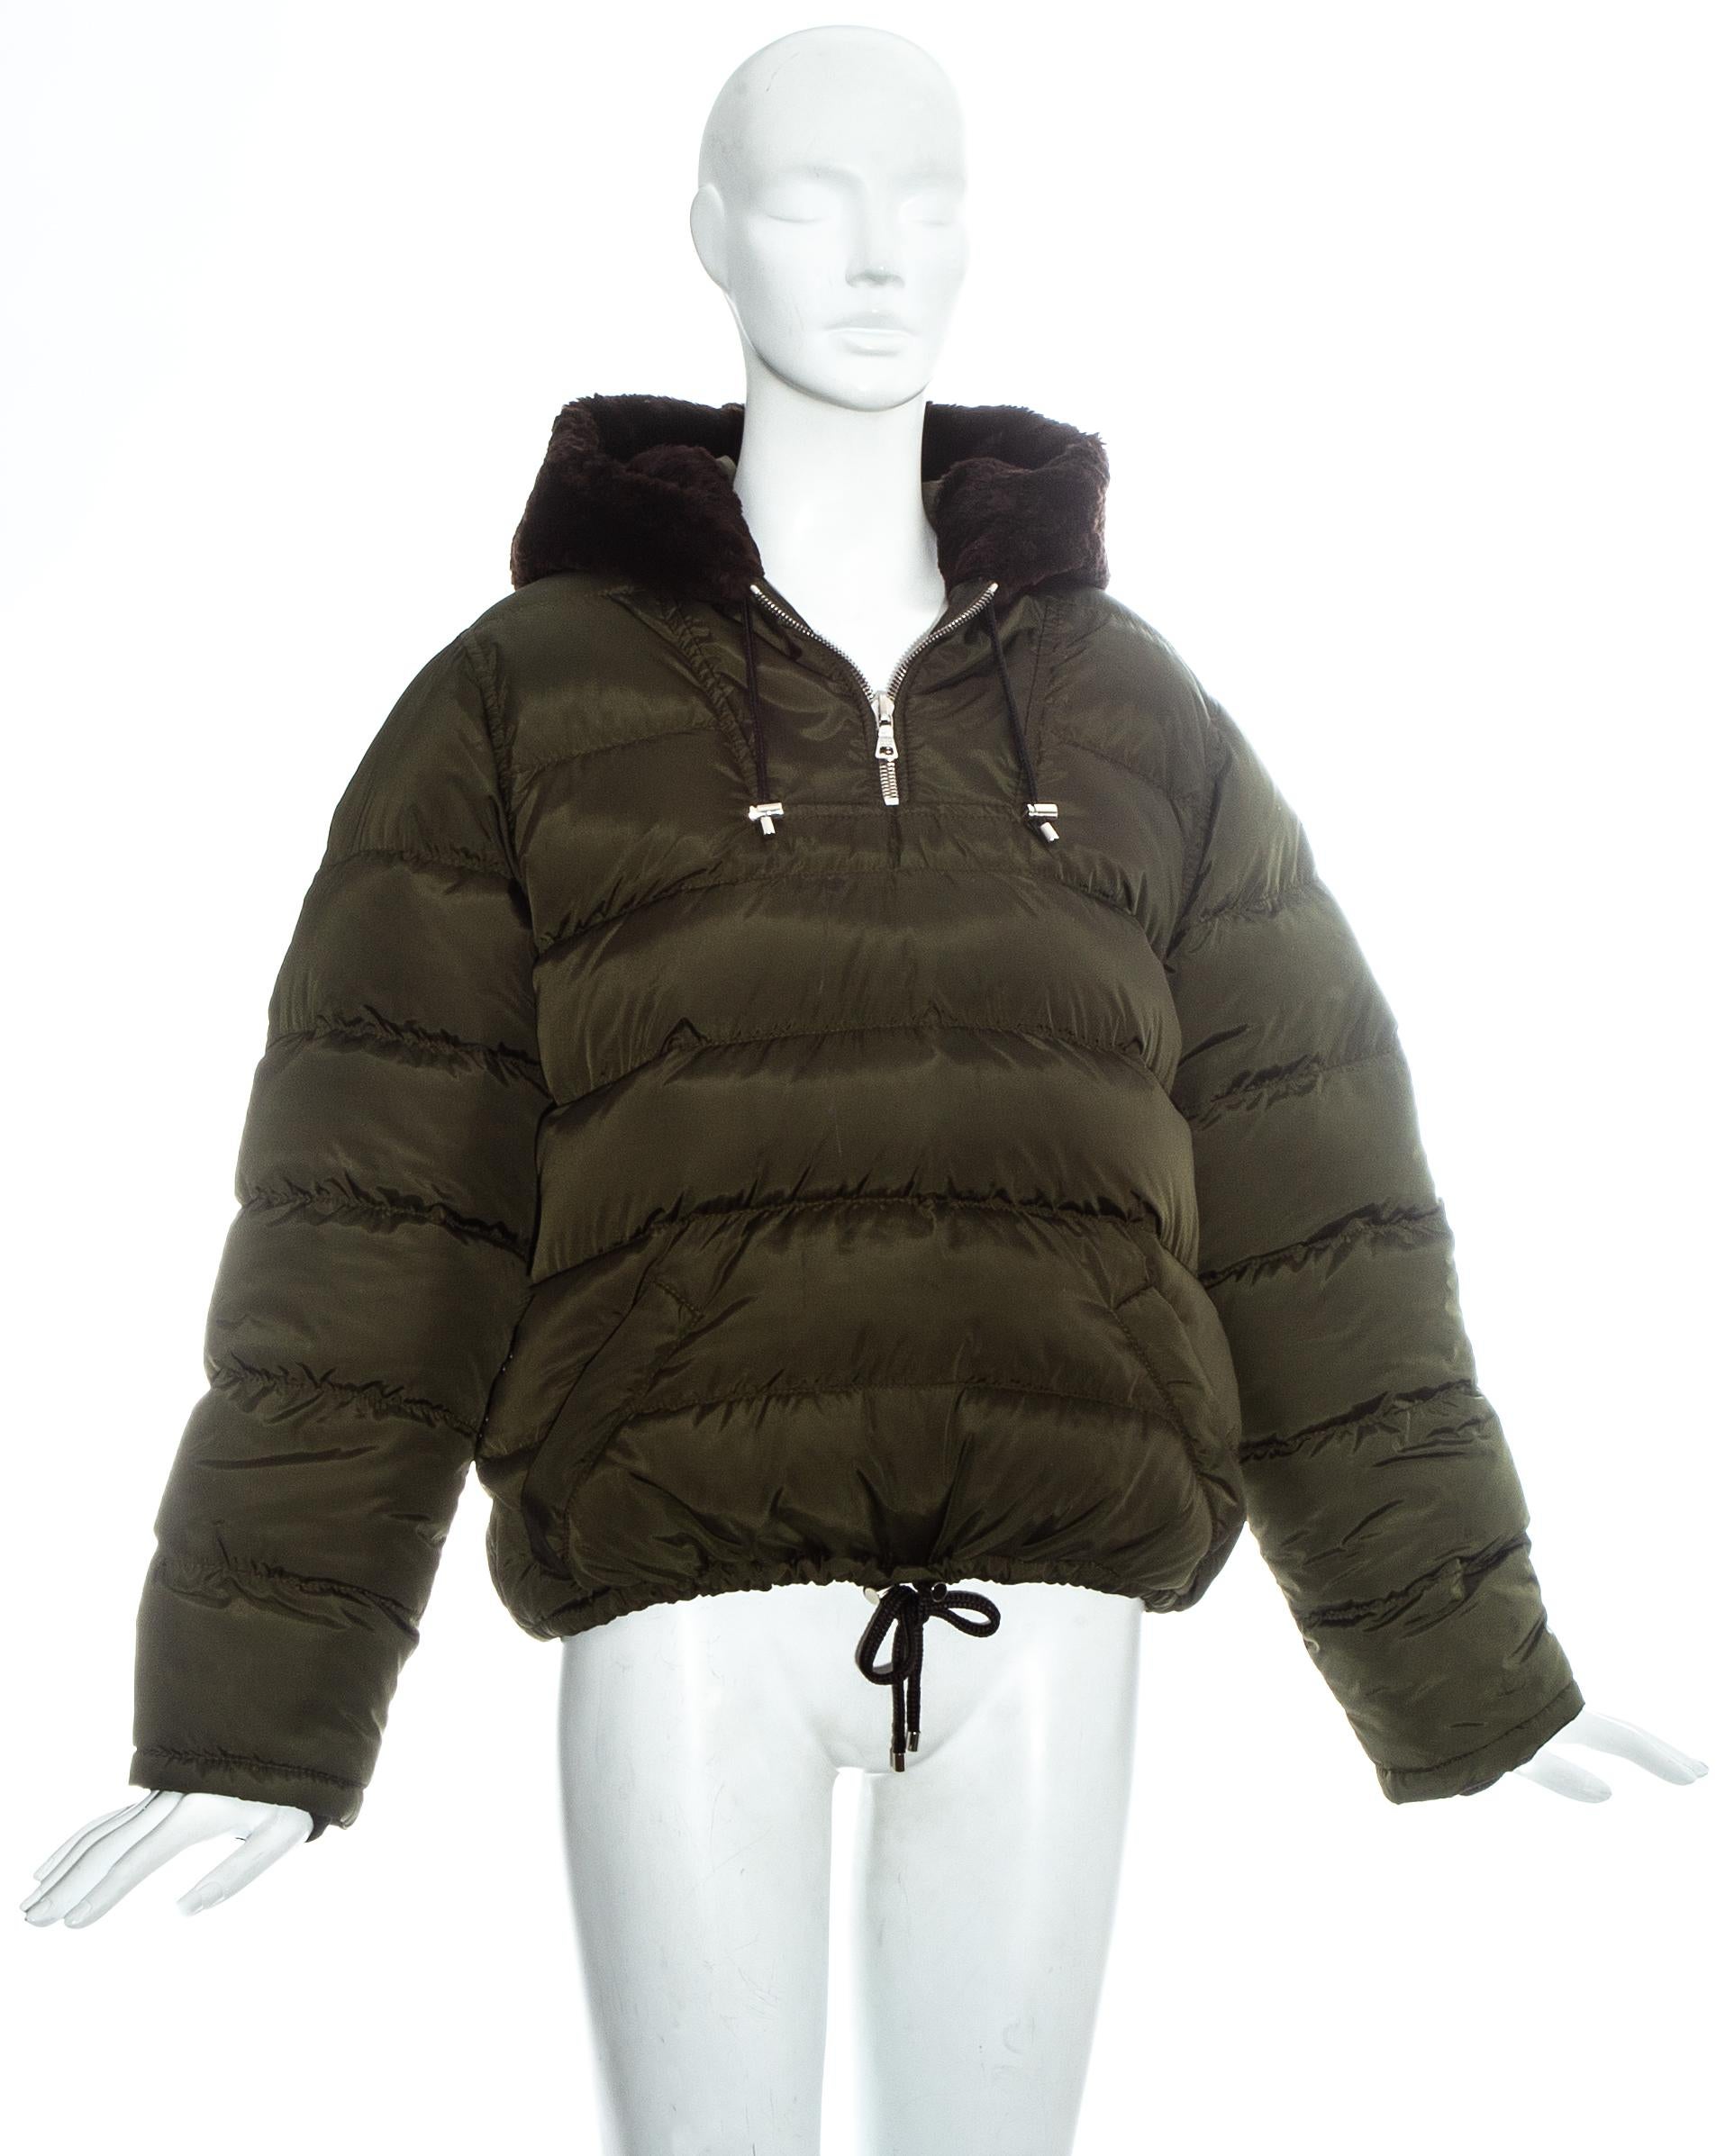 Prada green nylon duck down puffer sweater with beaver fur trim hood. Two zip front pockets, Drawstring toggle fastening on waist and hood, and built in elasticated belt. 

Fall-Winter 1993